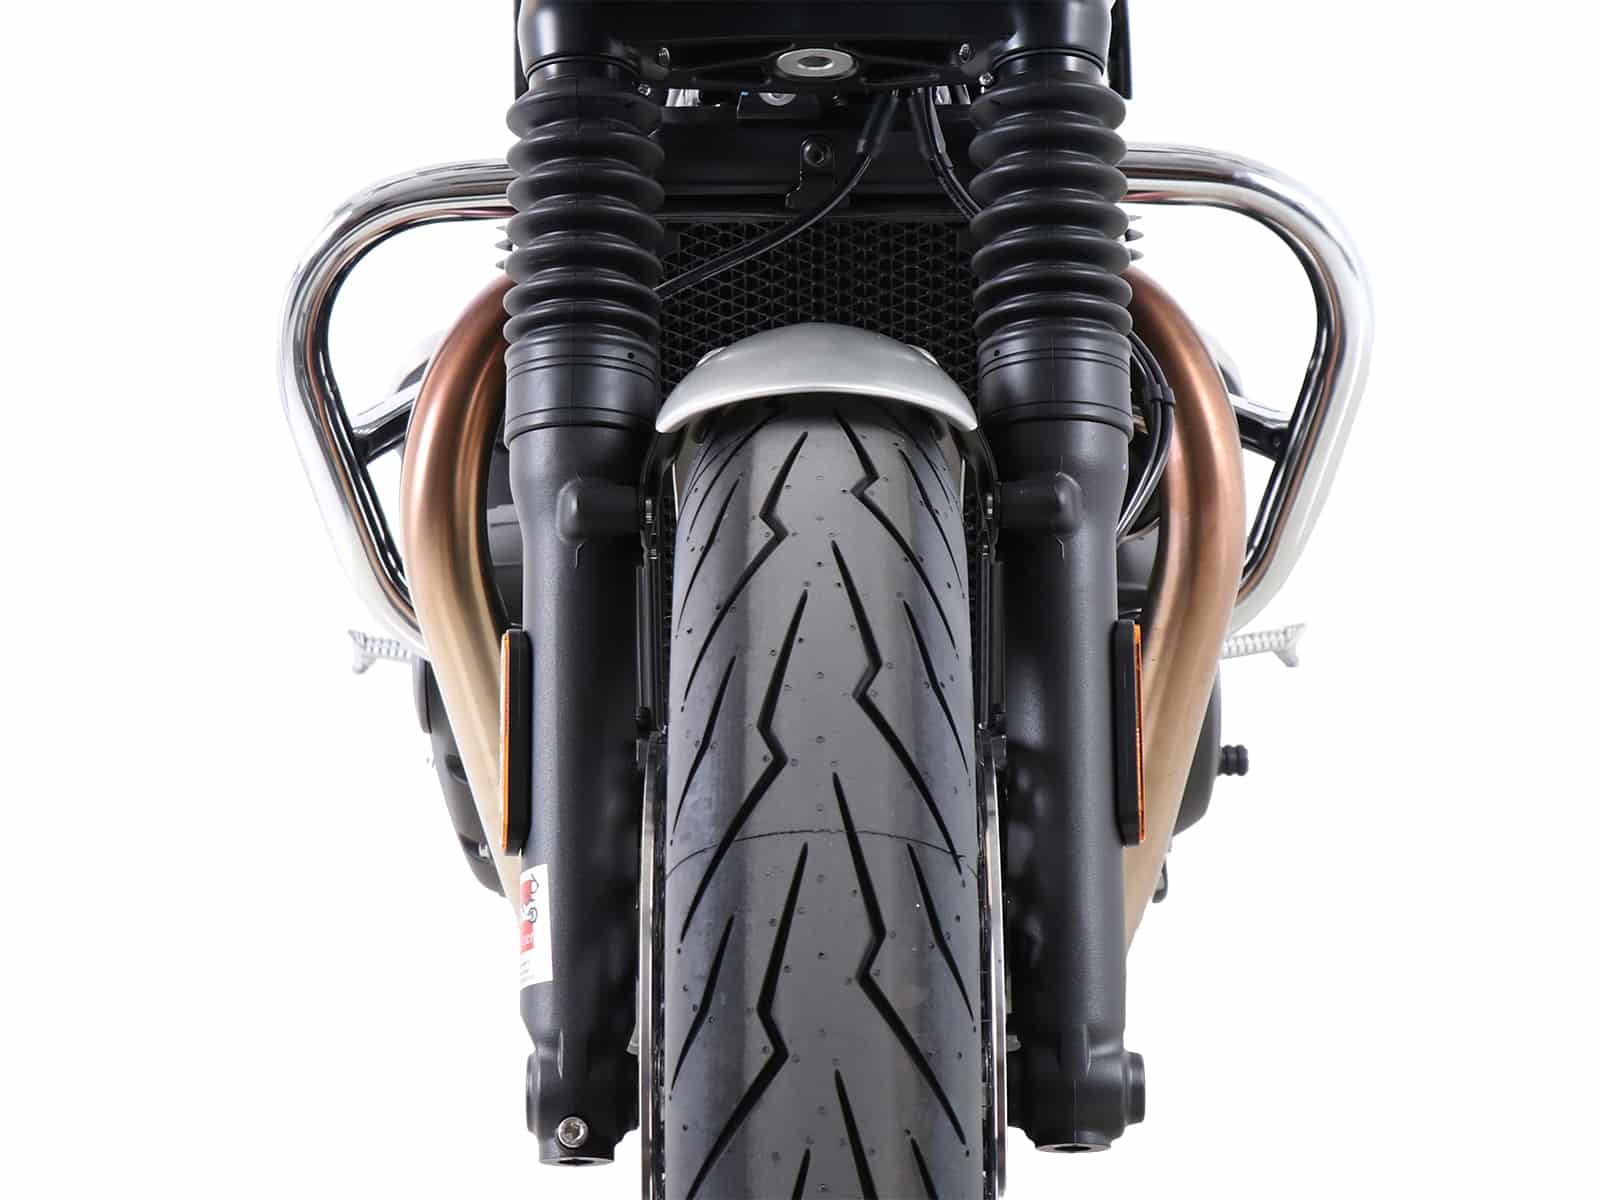 Engine protection bar chrome for Triumph Speed Twin (2019-2021)